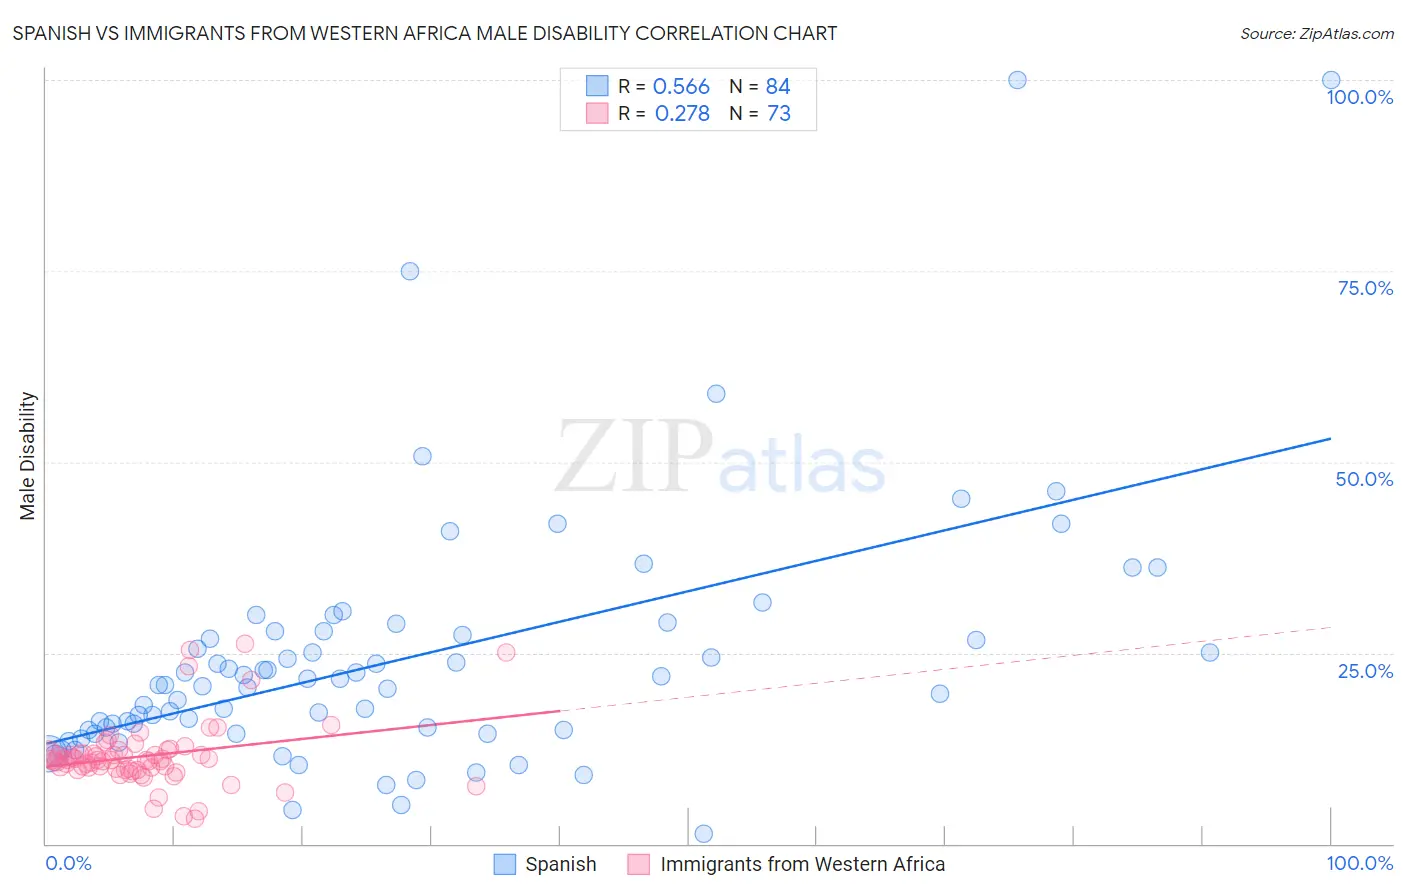 Spanish vs Immigrants from Western Africa Male Disability